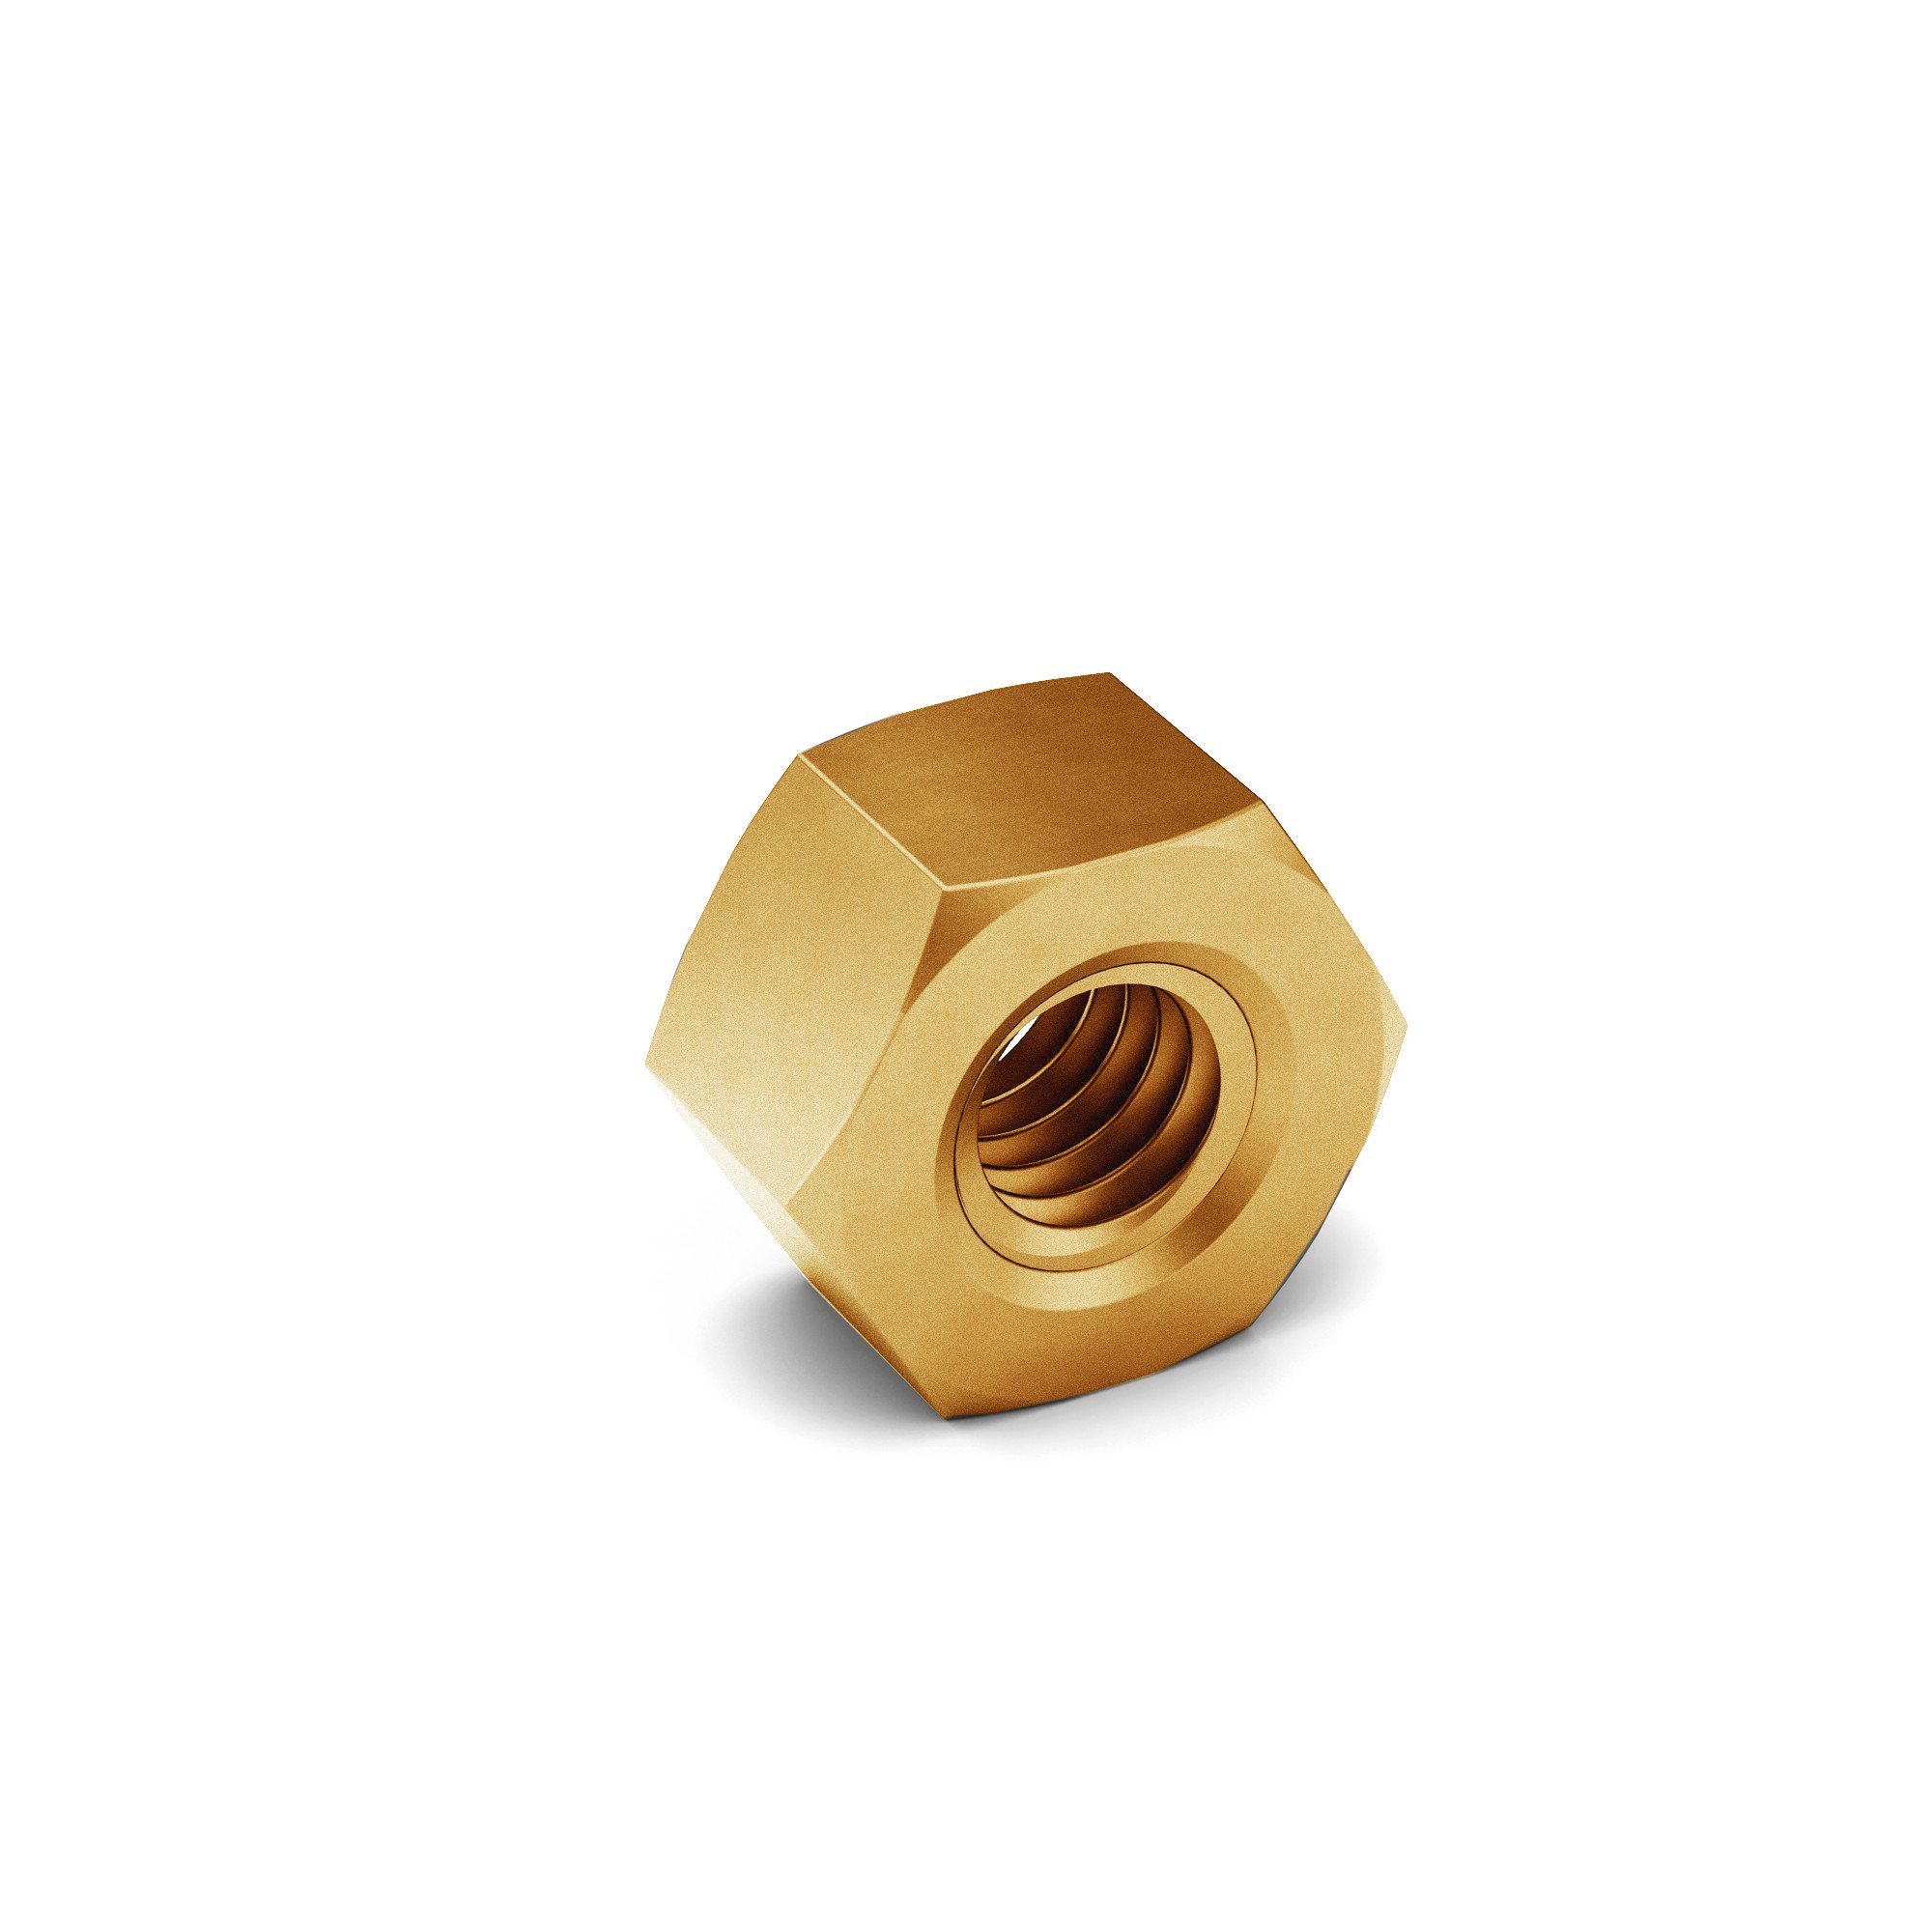 5/16-18 J995 GR 8 Hex Nut Zinc Yellow Made in USA